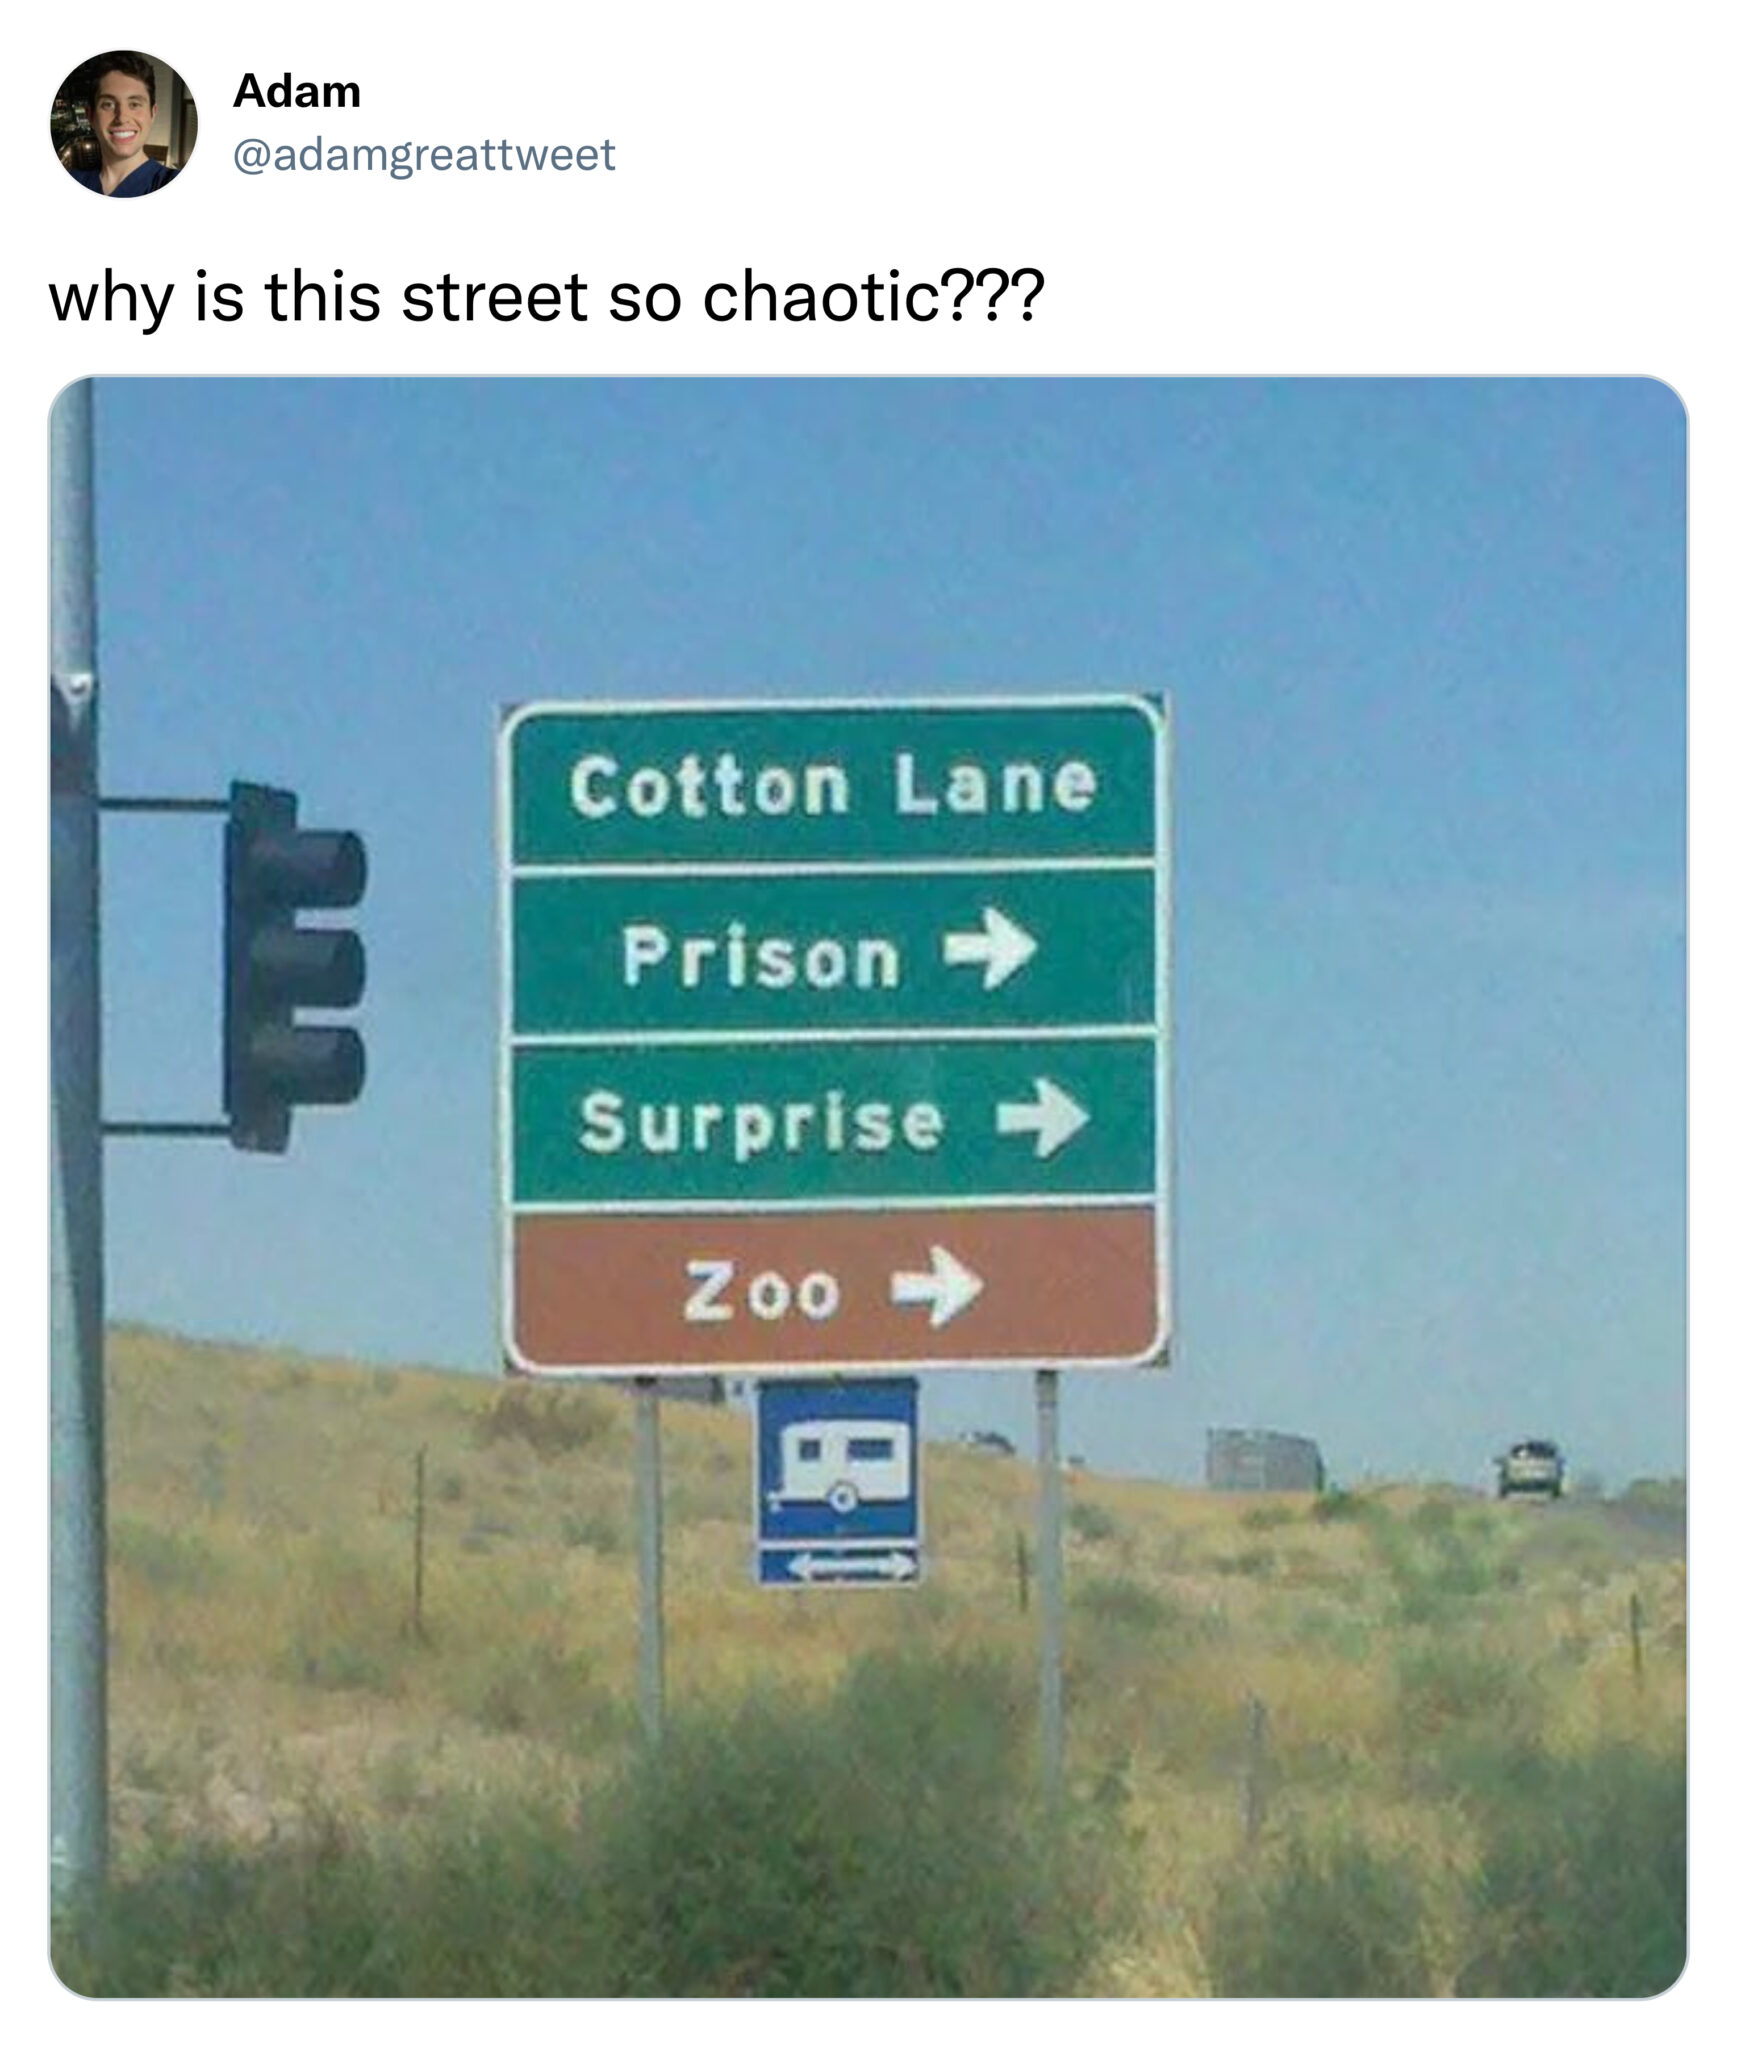 funny tweets - surprise prison zoo - Adam why is this street so chaotic??? Cotton Lane Prison>> Surprise > Zoo>>